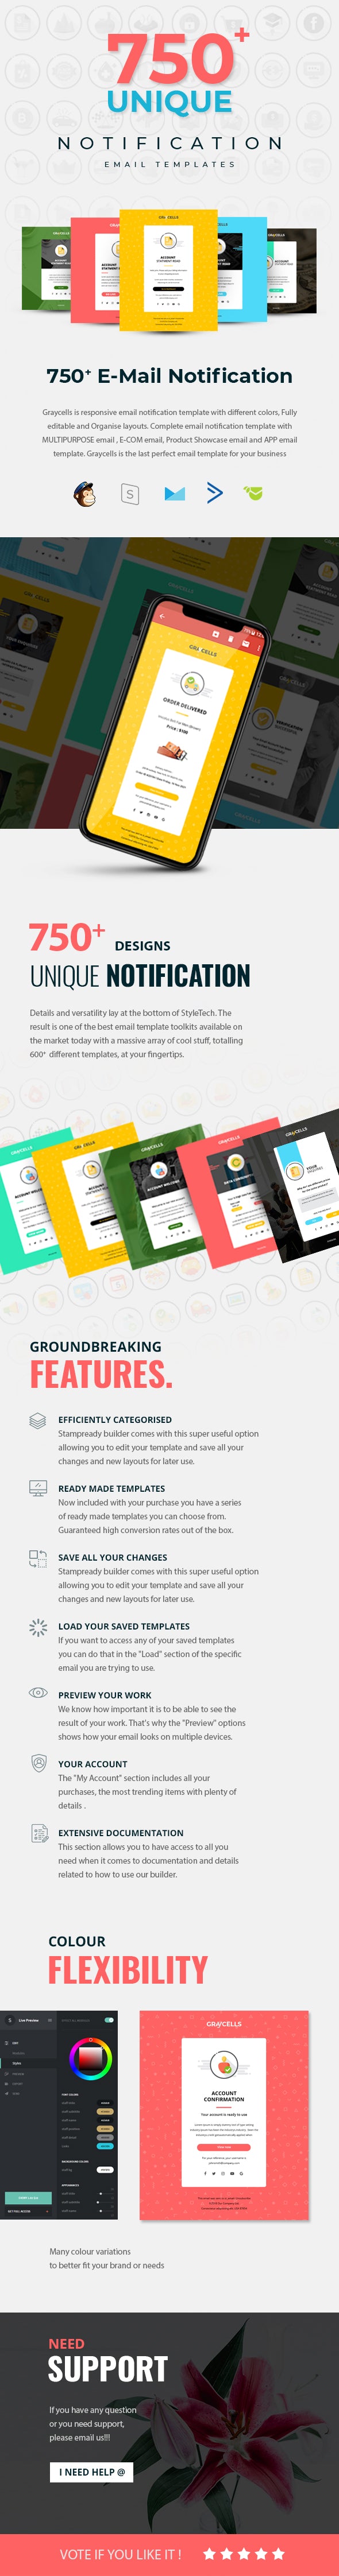 750 Responsive Email Notification Template